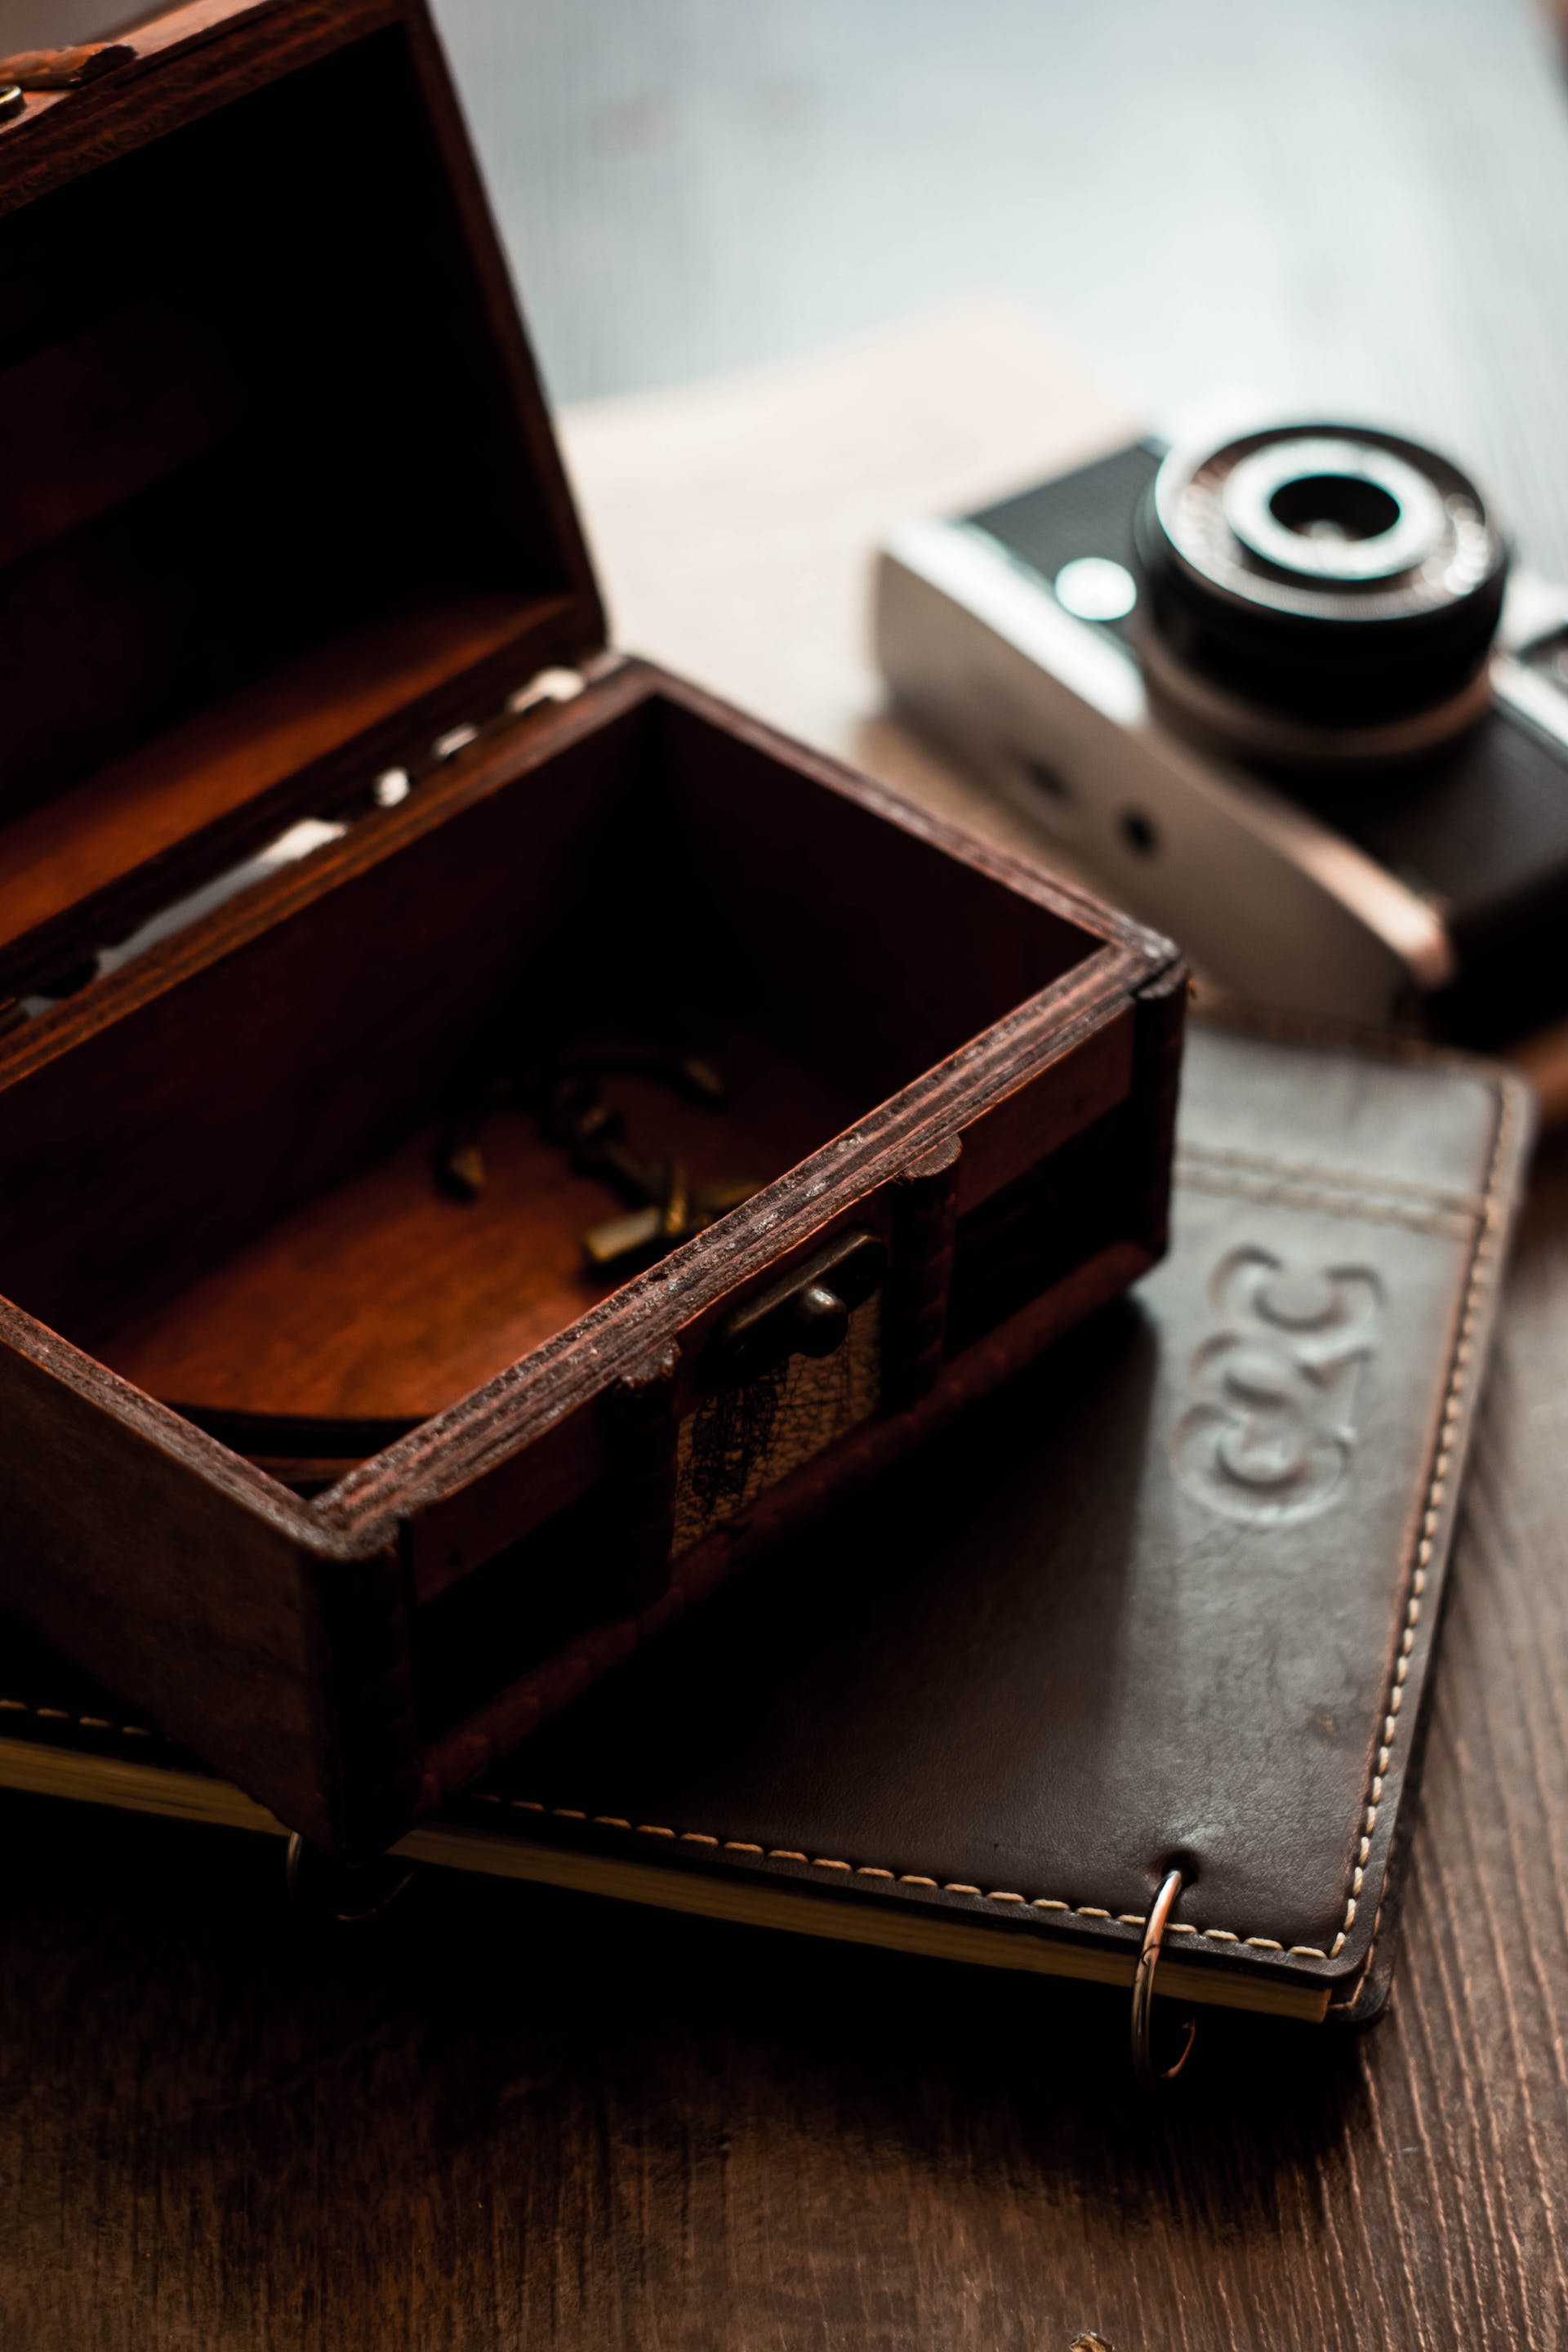 Wooden box and notebook | Source: Pexels